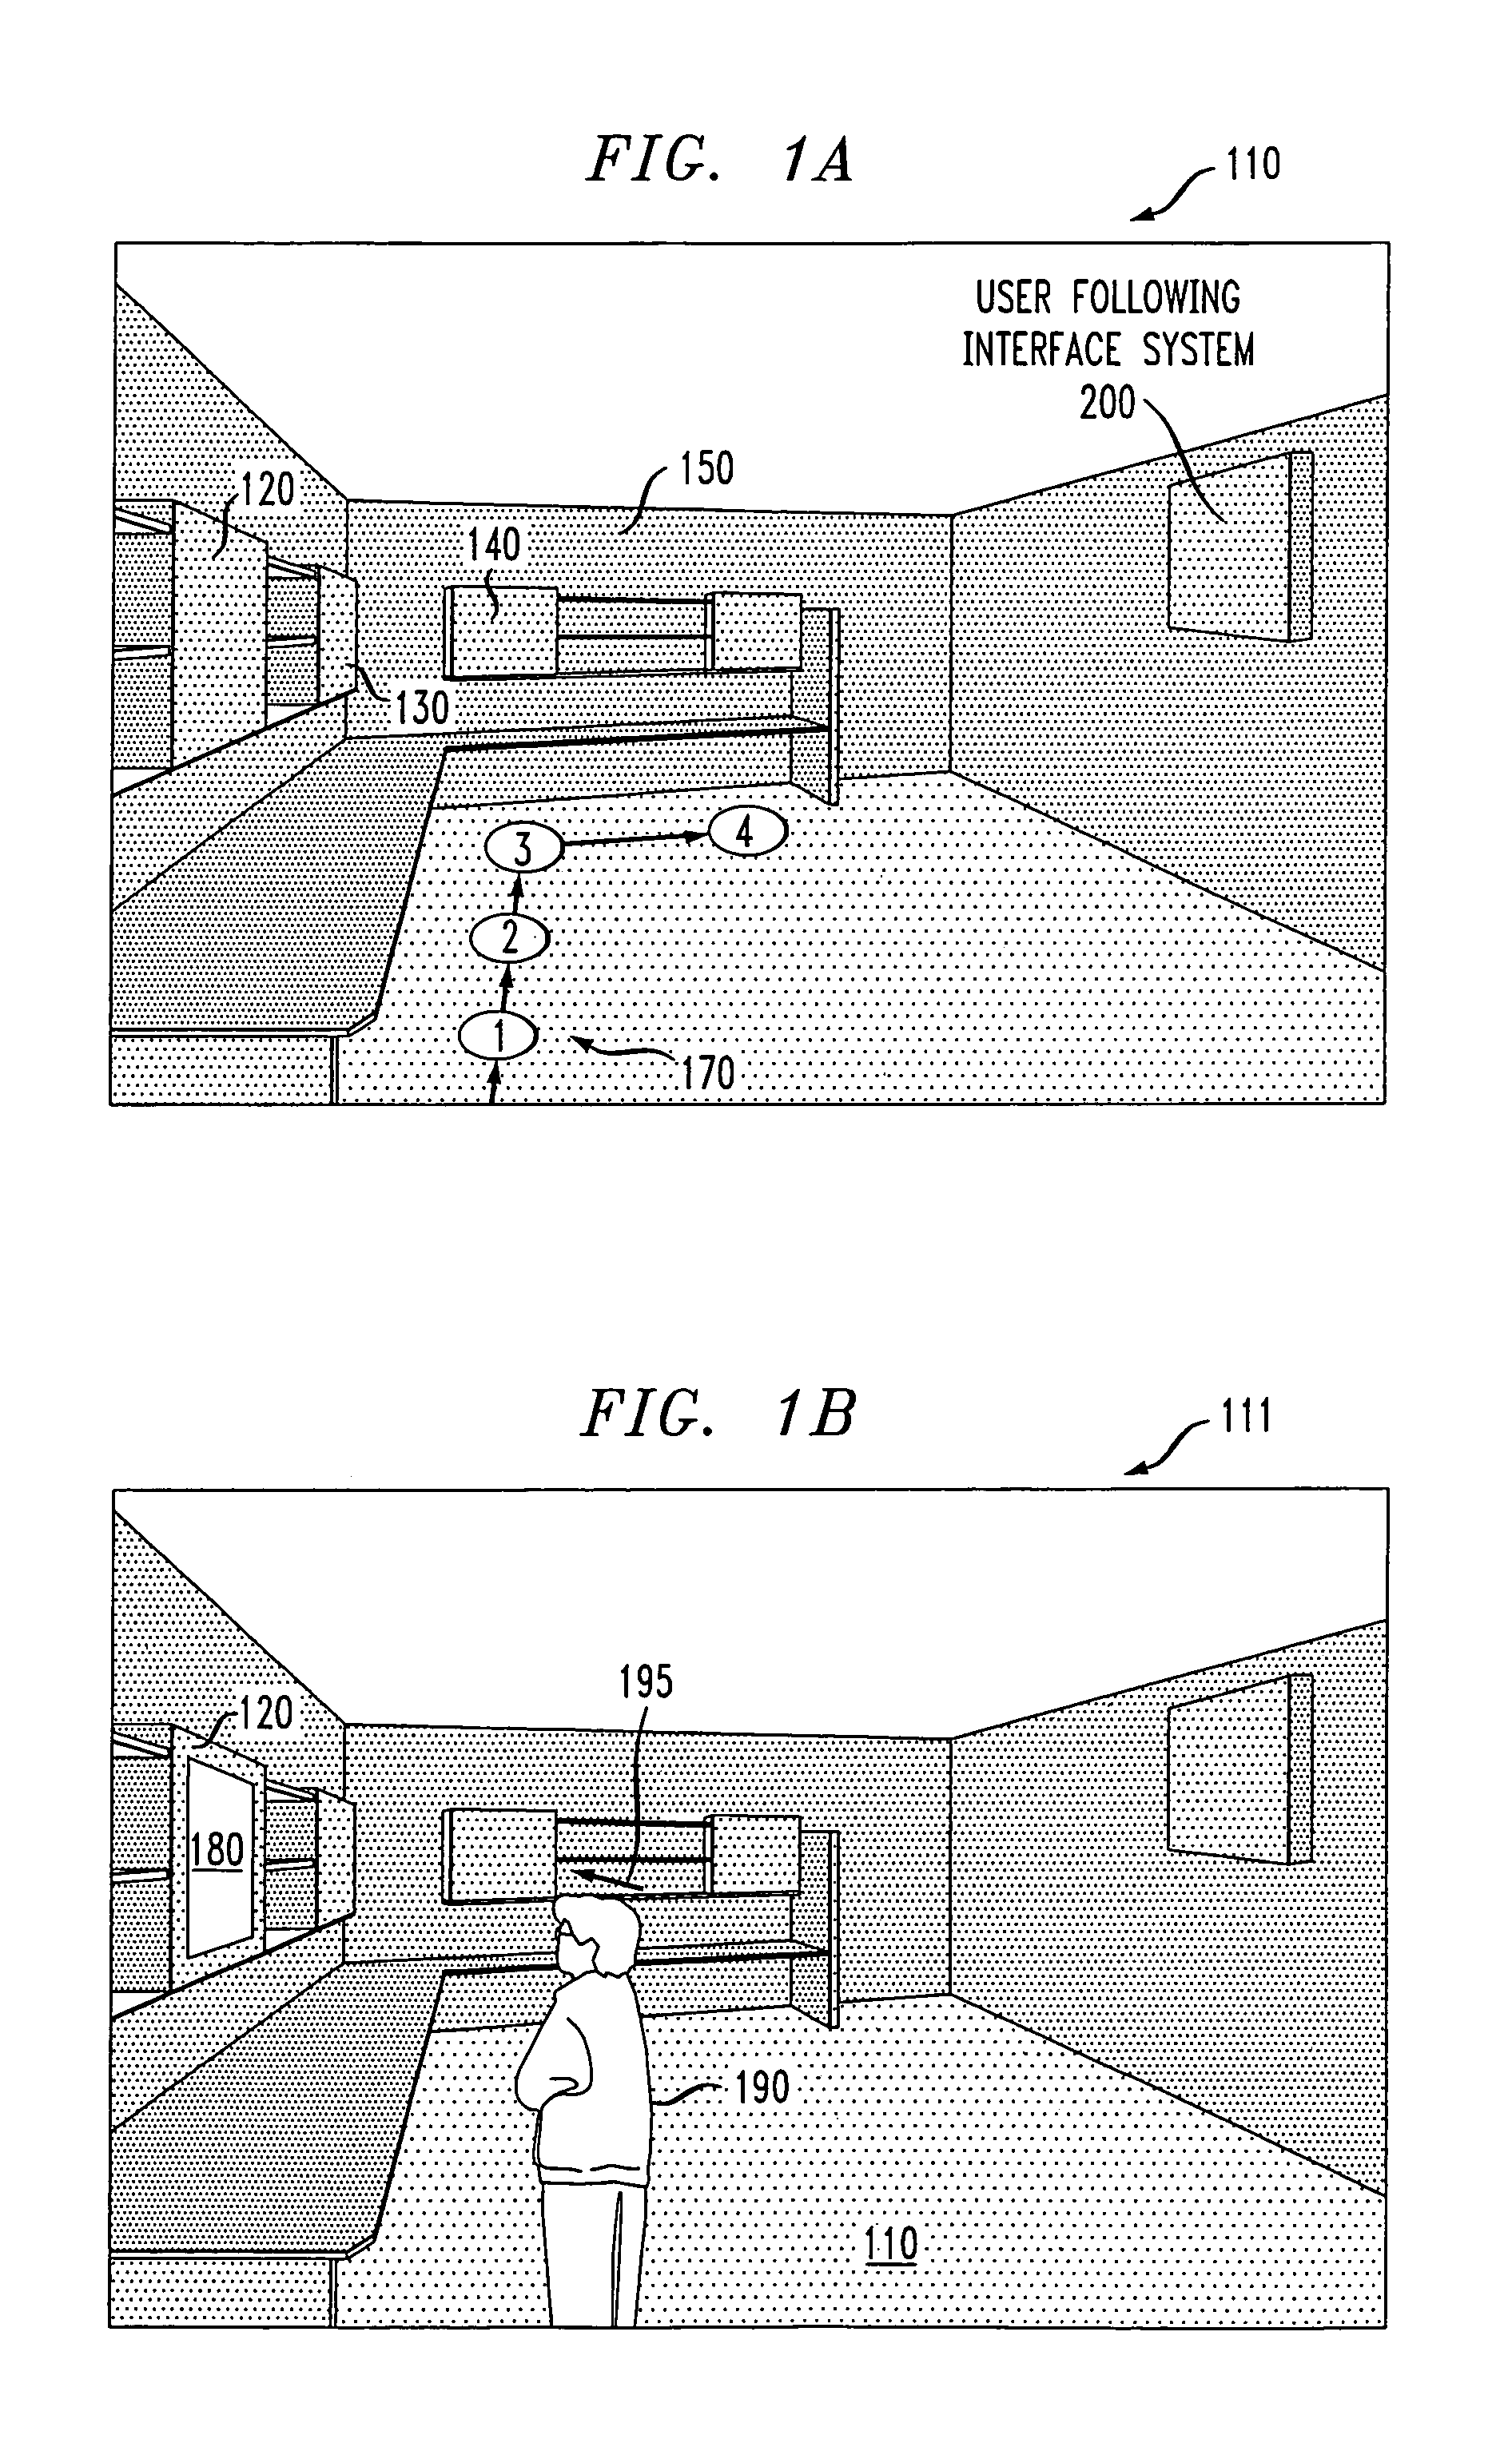 Method and system for a user-following interface